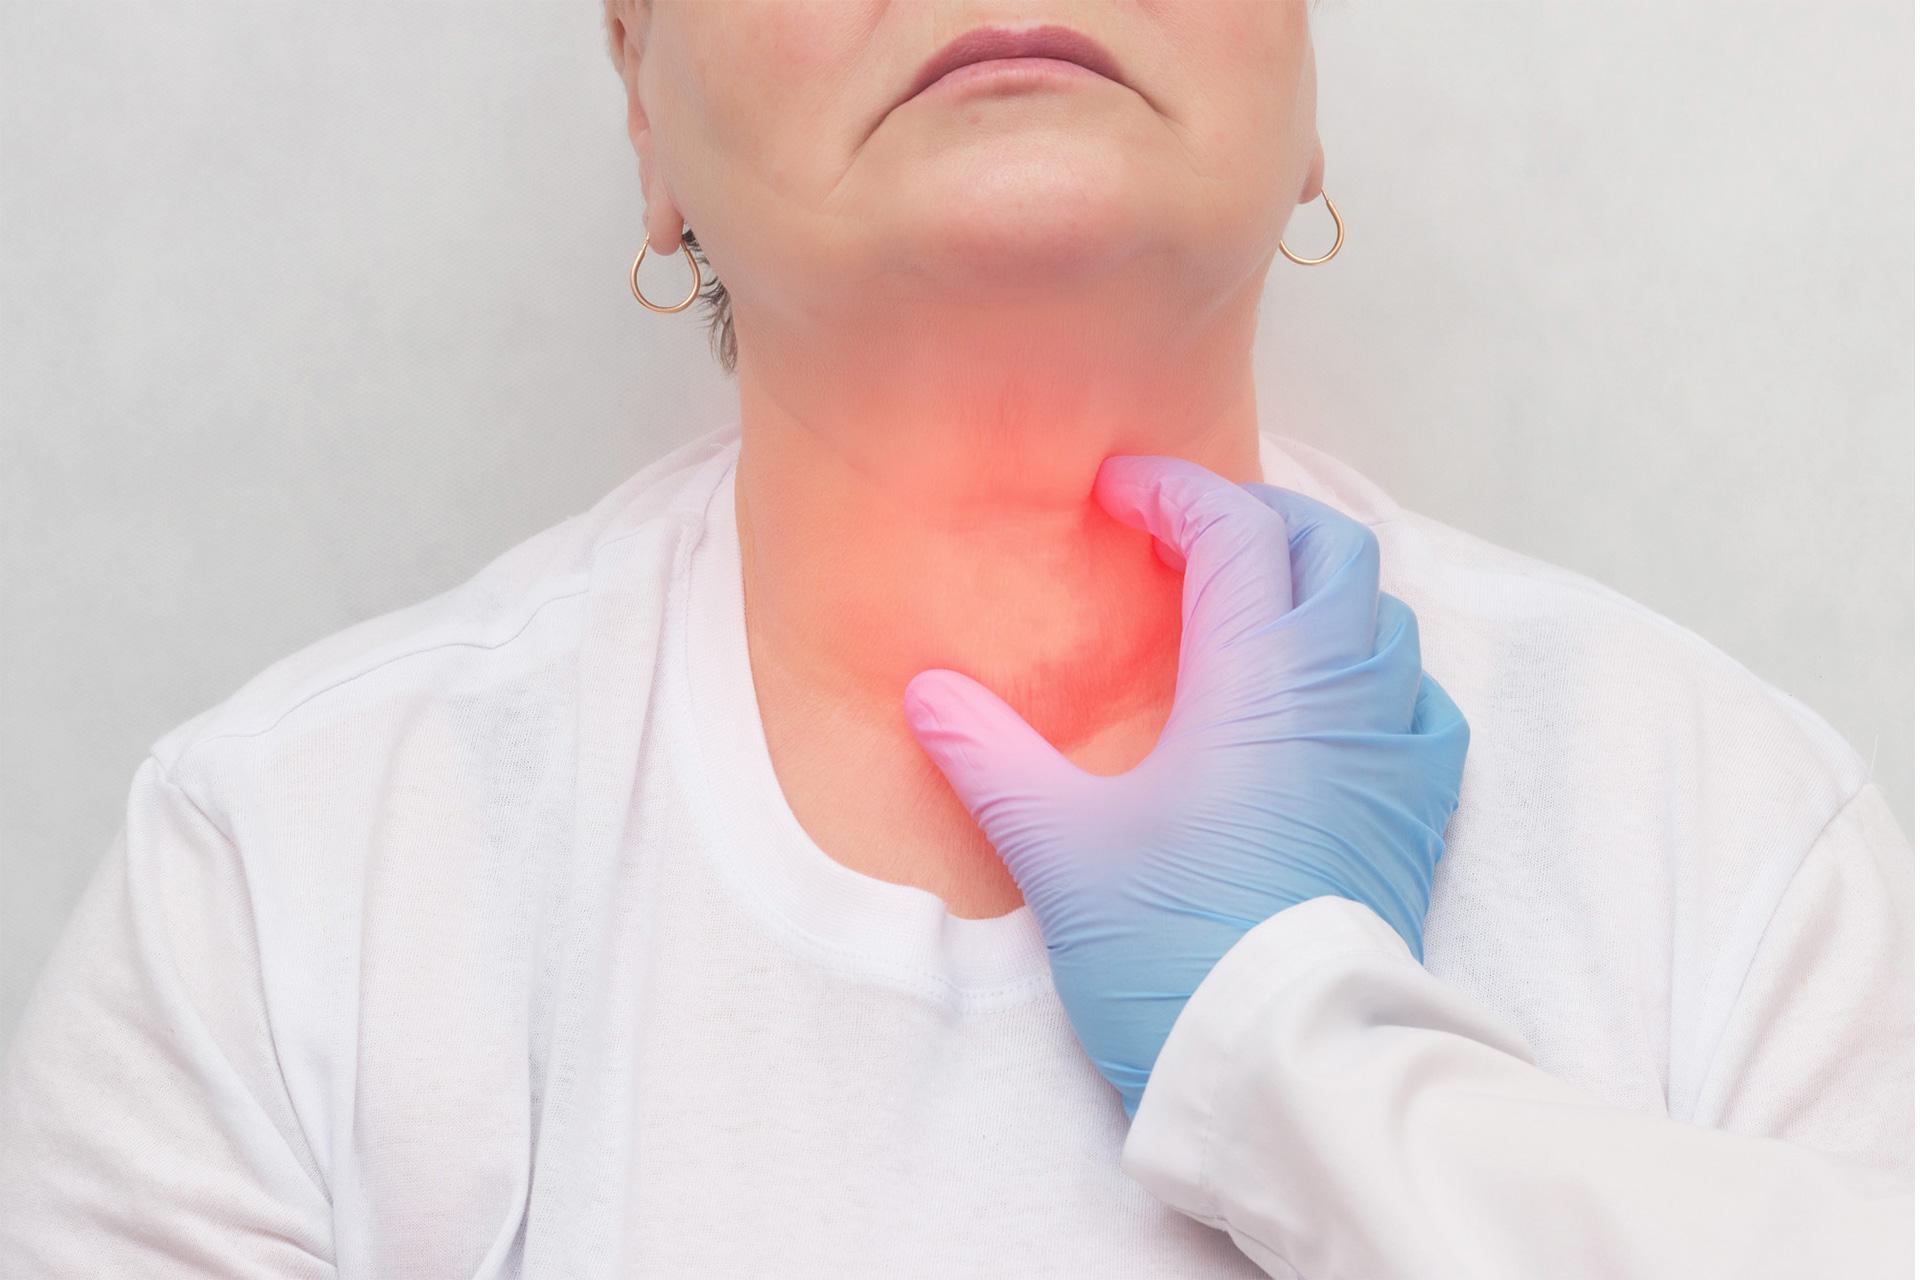 Goiter: Causes, Symptoms,Types and Treatment